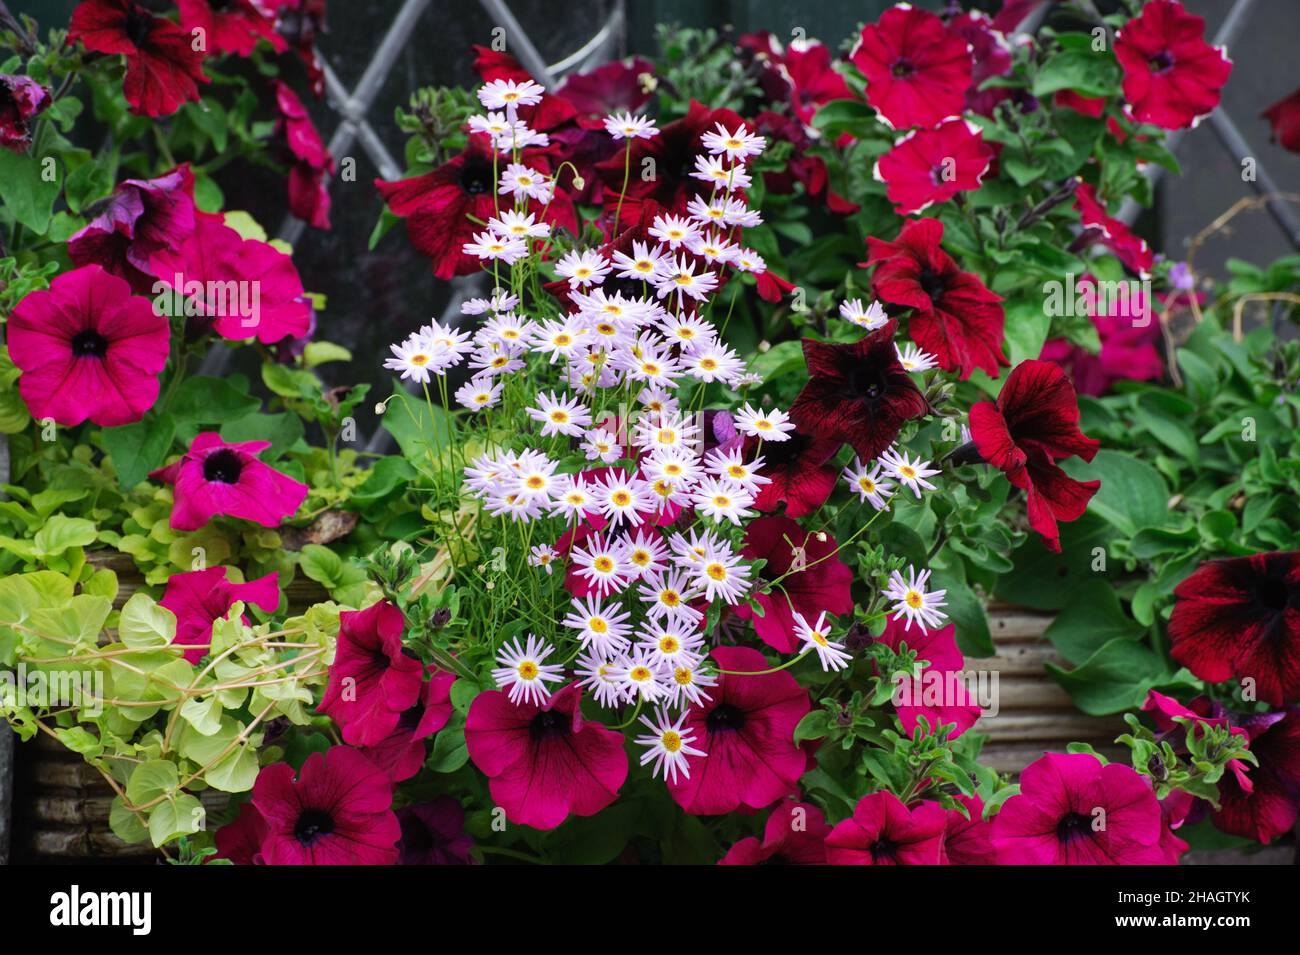 Red petunia with aster and Daisy flowers Growing in the garden Stock Photo